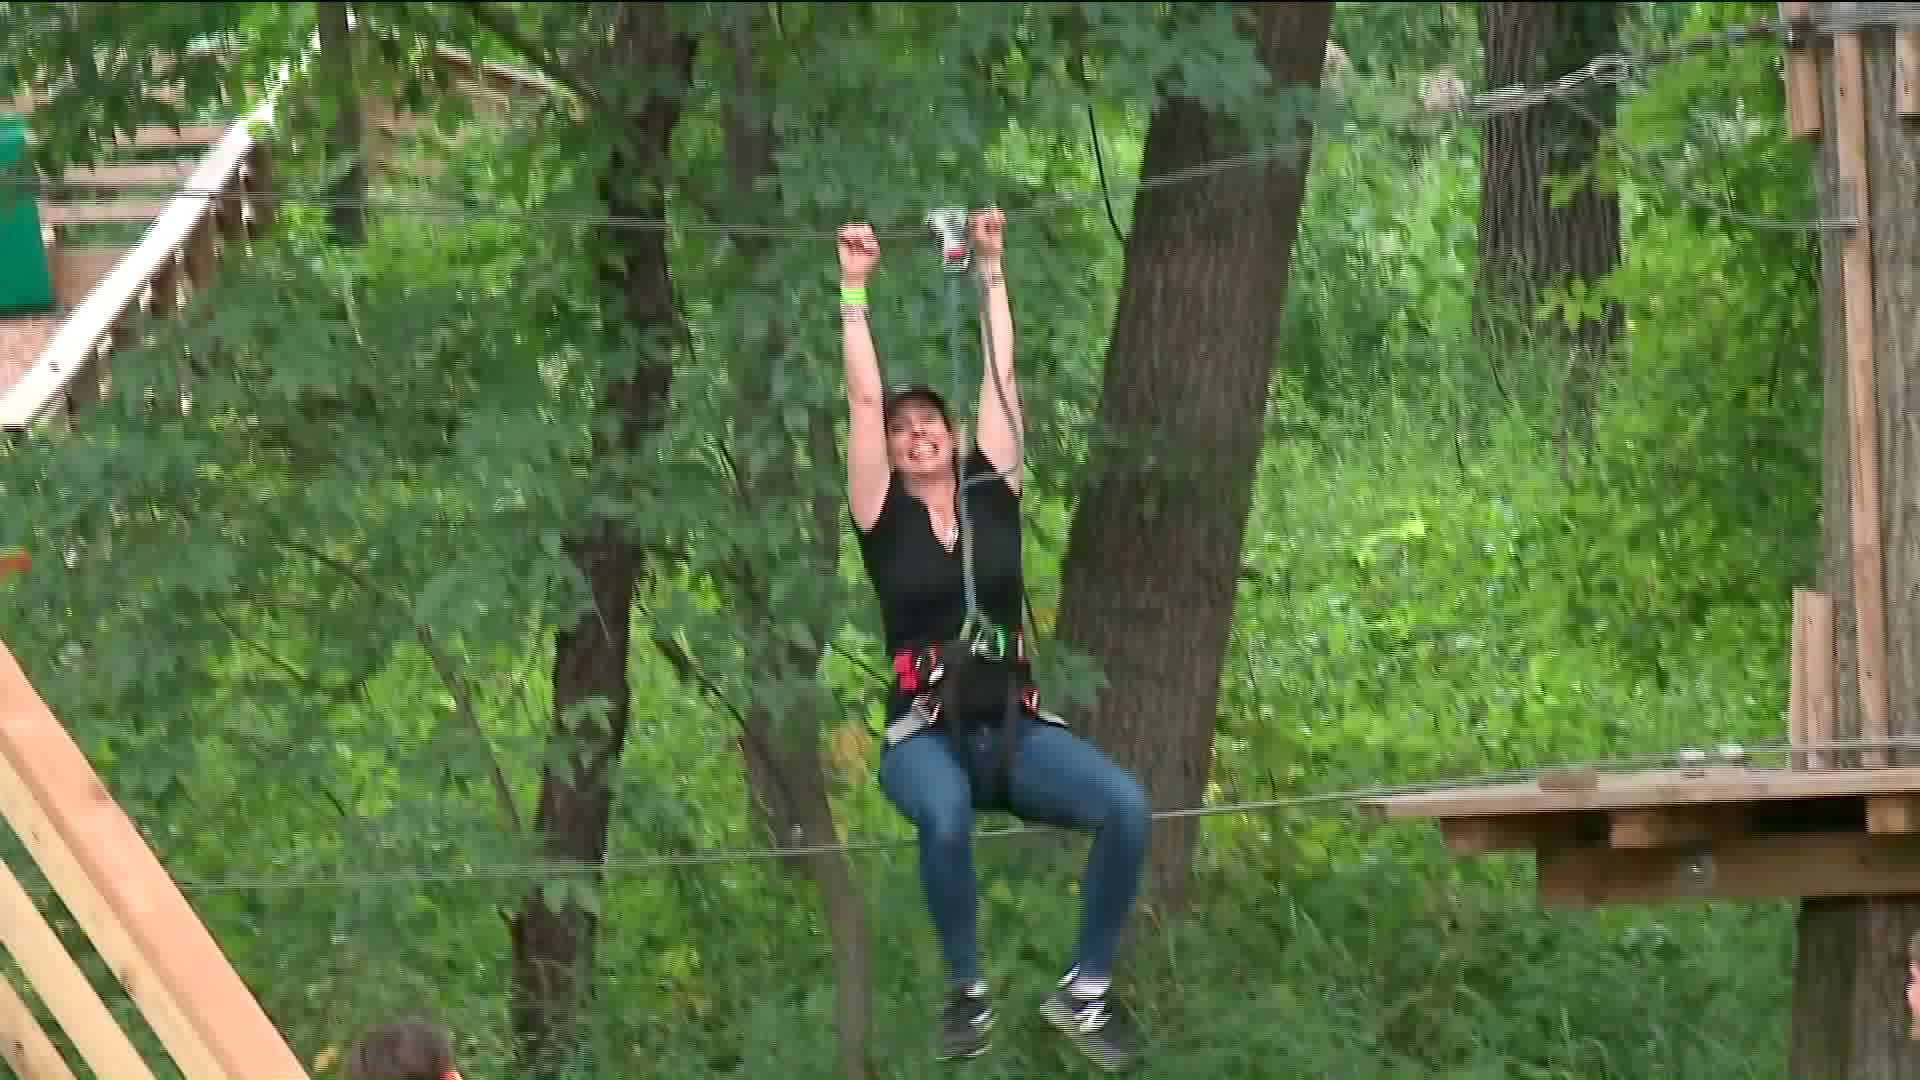 Around Town Checks Out Go Ape Treetop Adventure and Treetop Junior